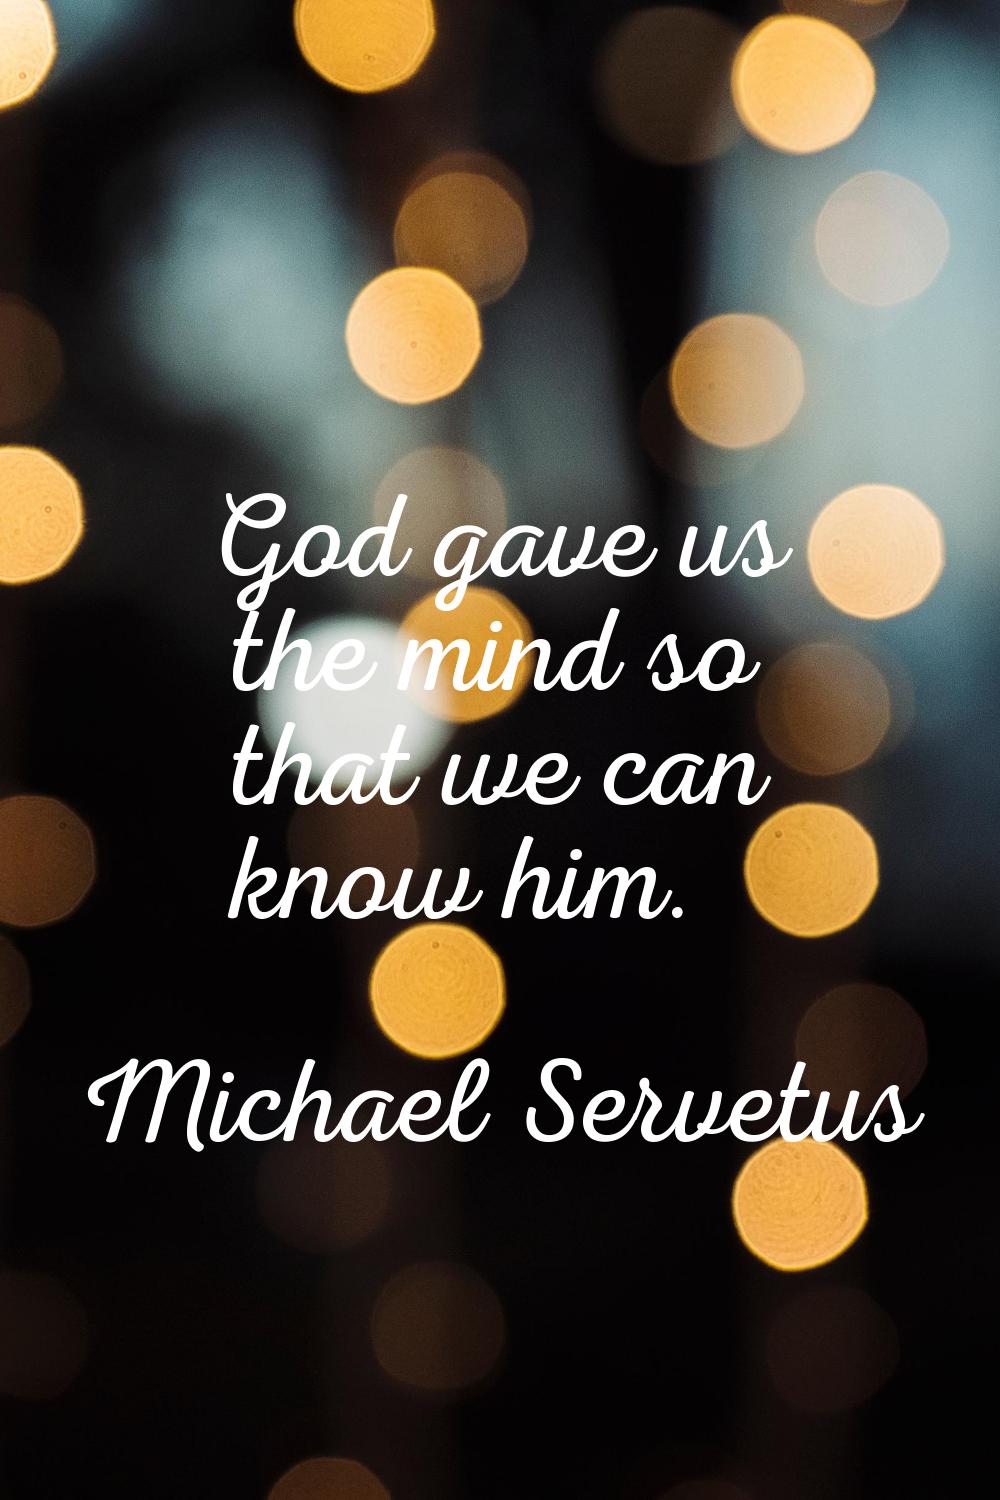 God gave us the mind so that we can know him.